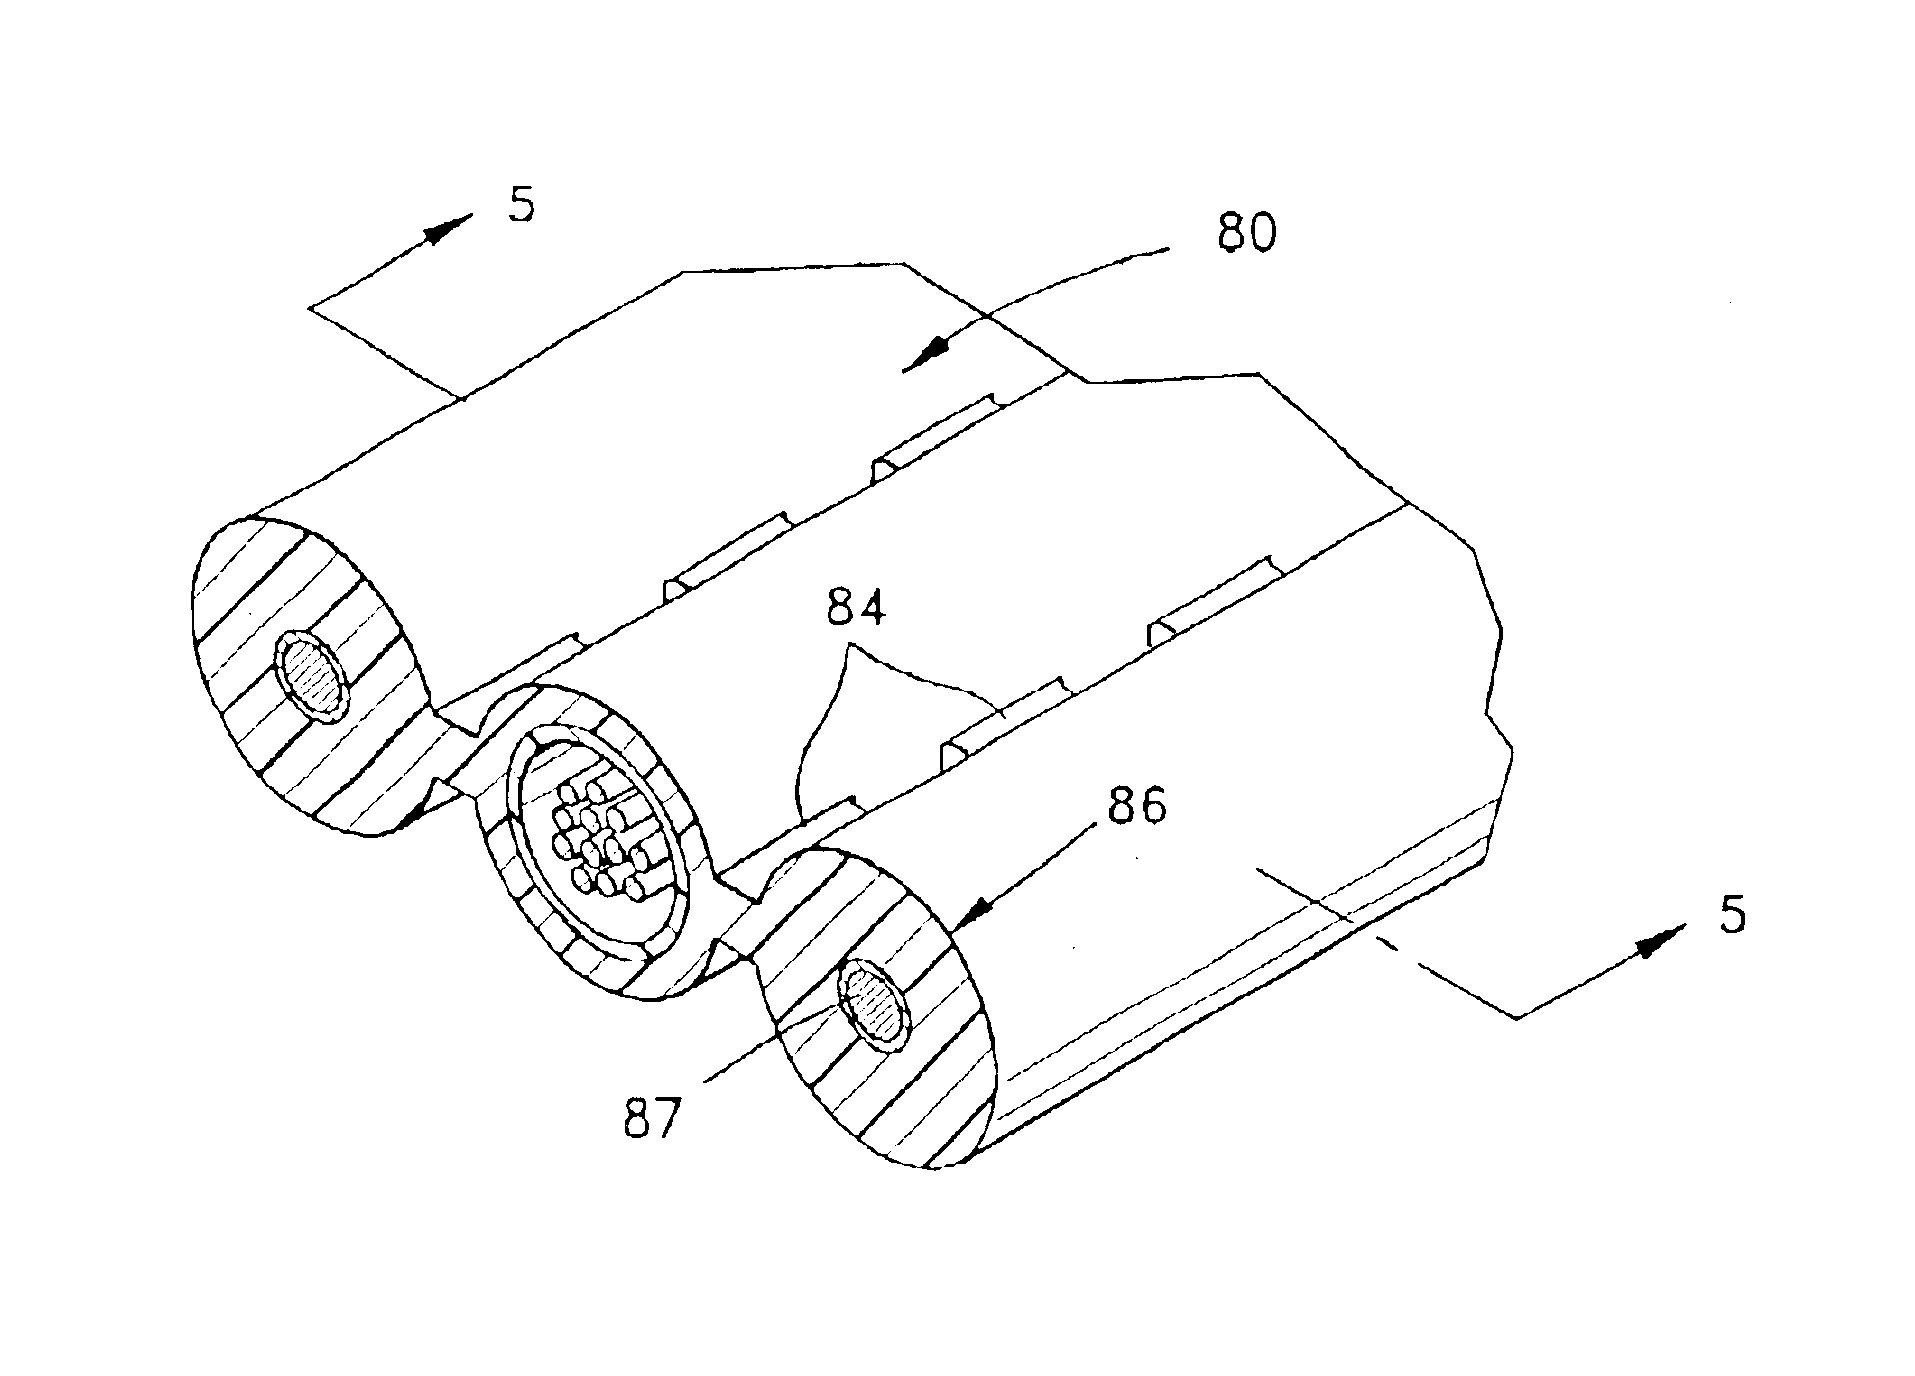 Self-supporting cables and an apparatus and methods for making the same